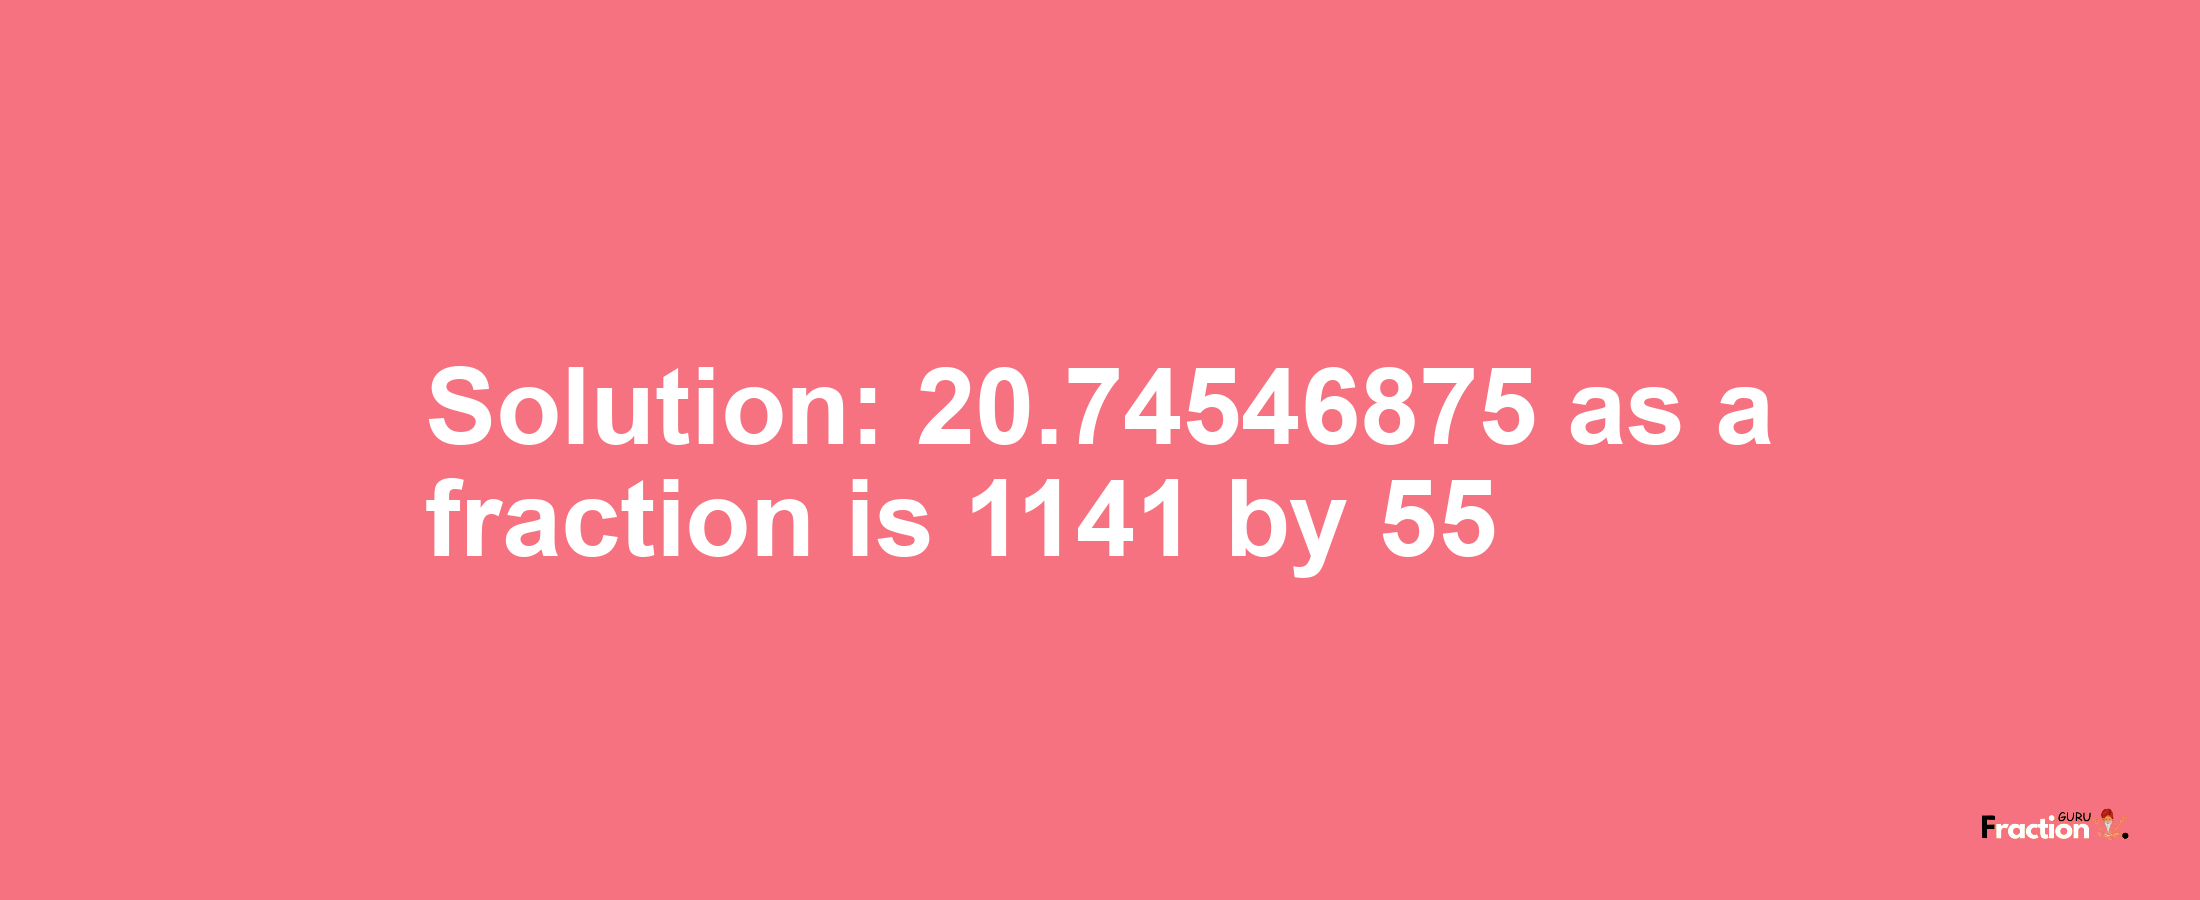 Solution:20.74546875 as a fraction is 1141/55